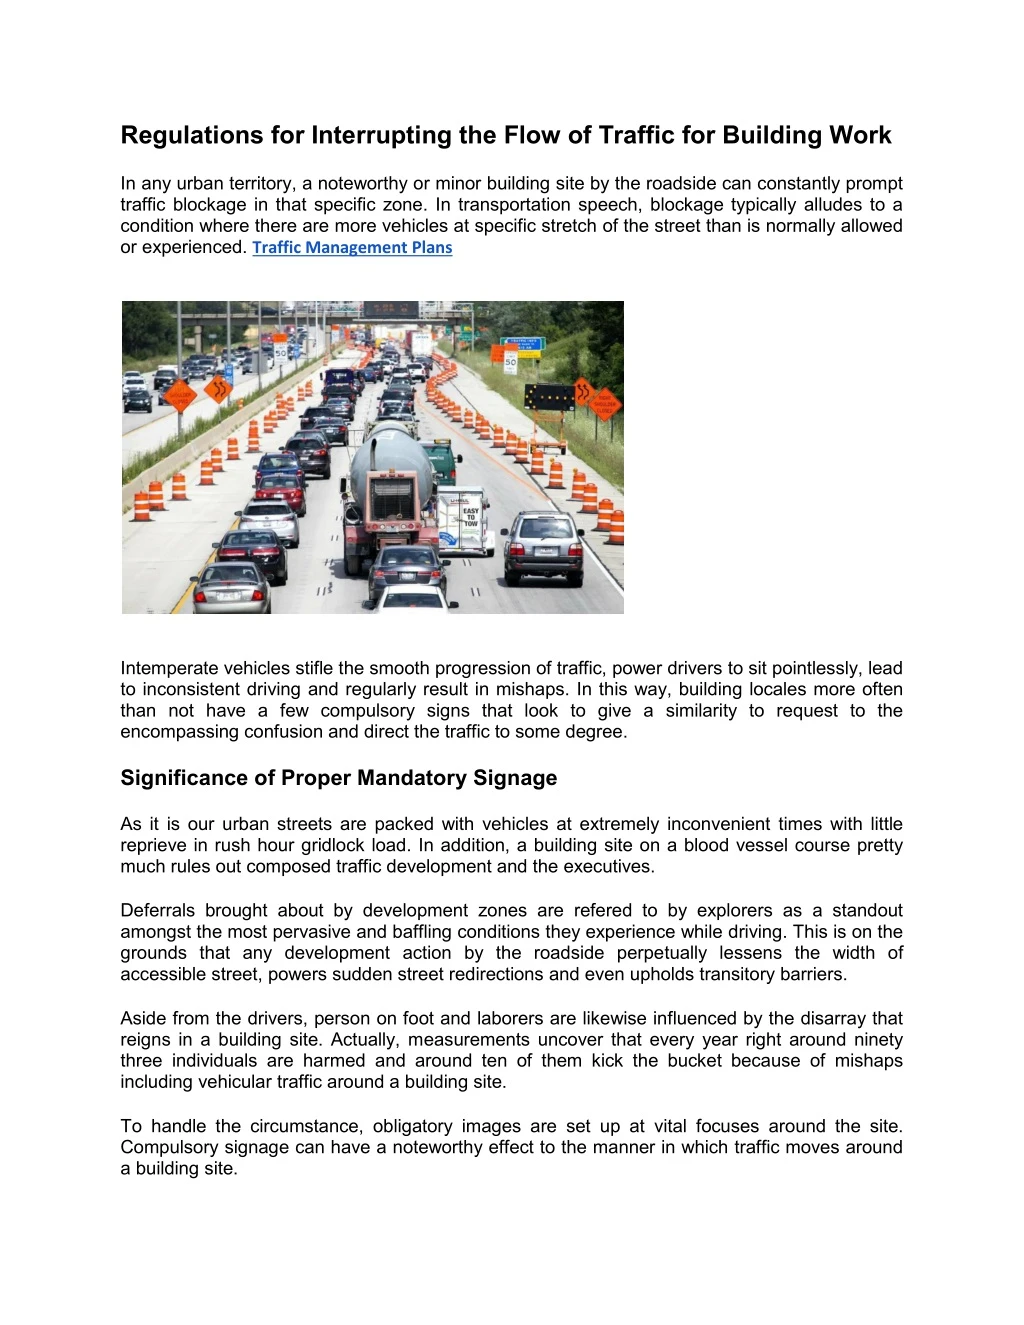 regulations for interrupting the flow of traffic